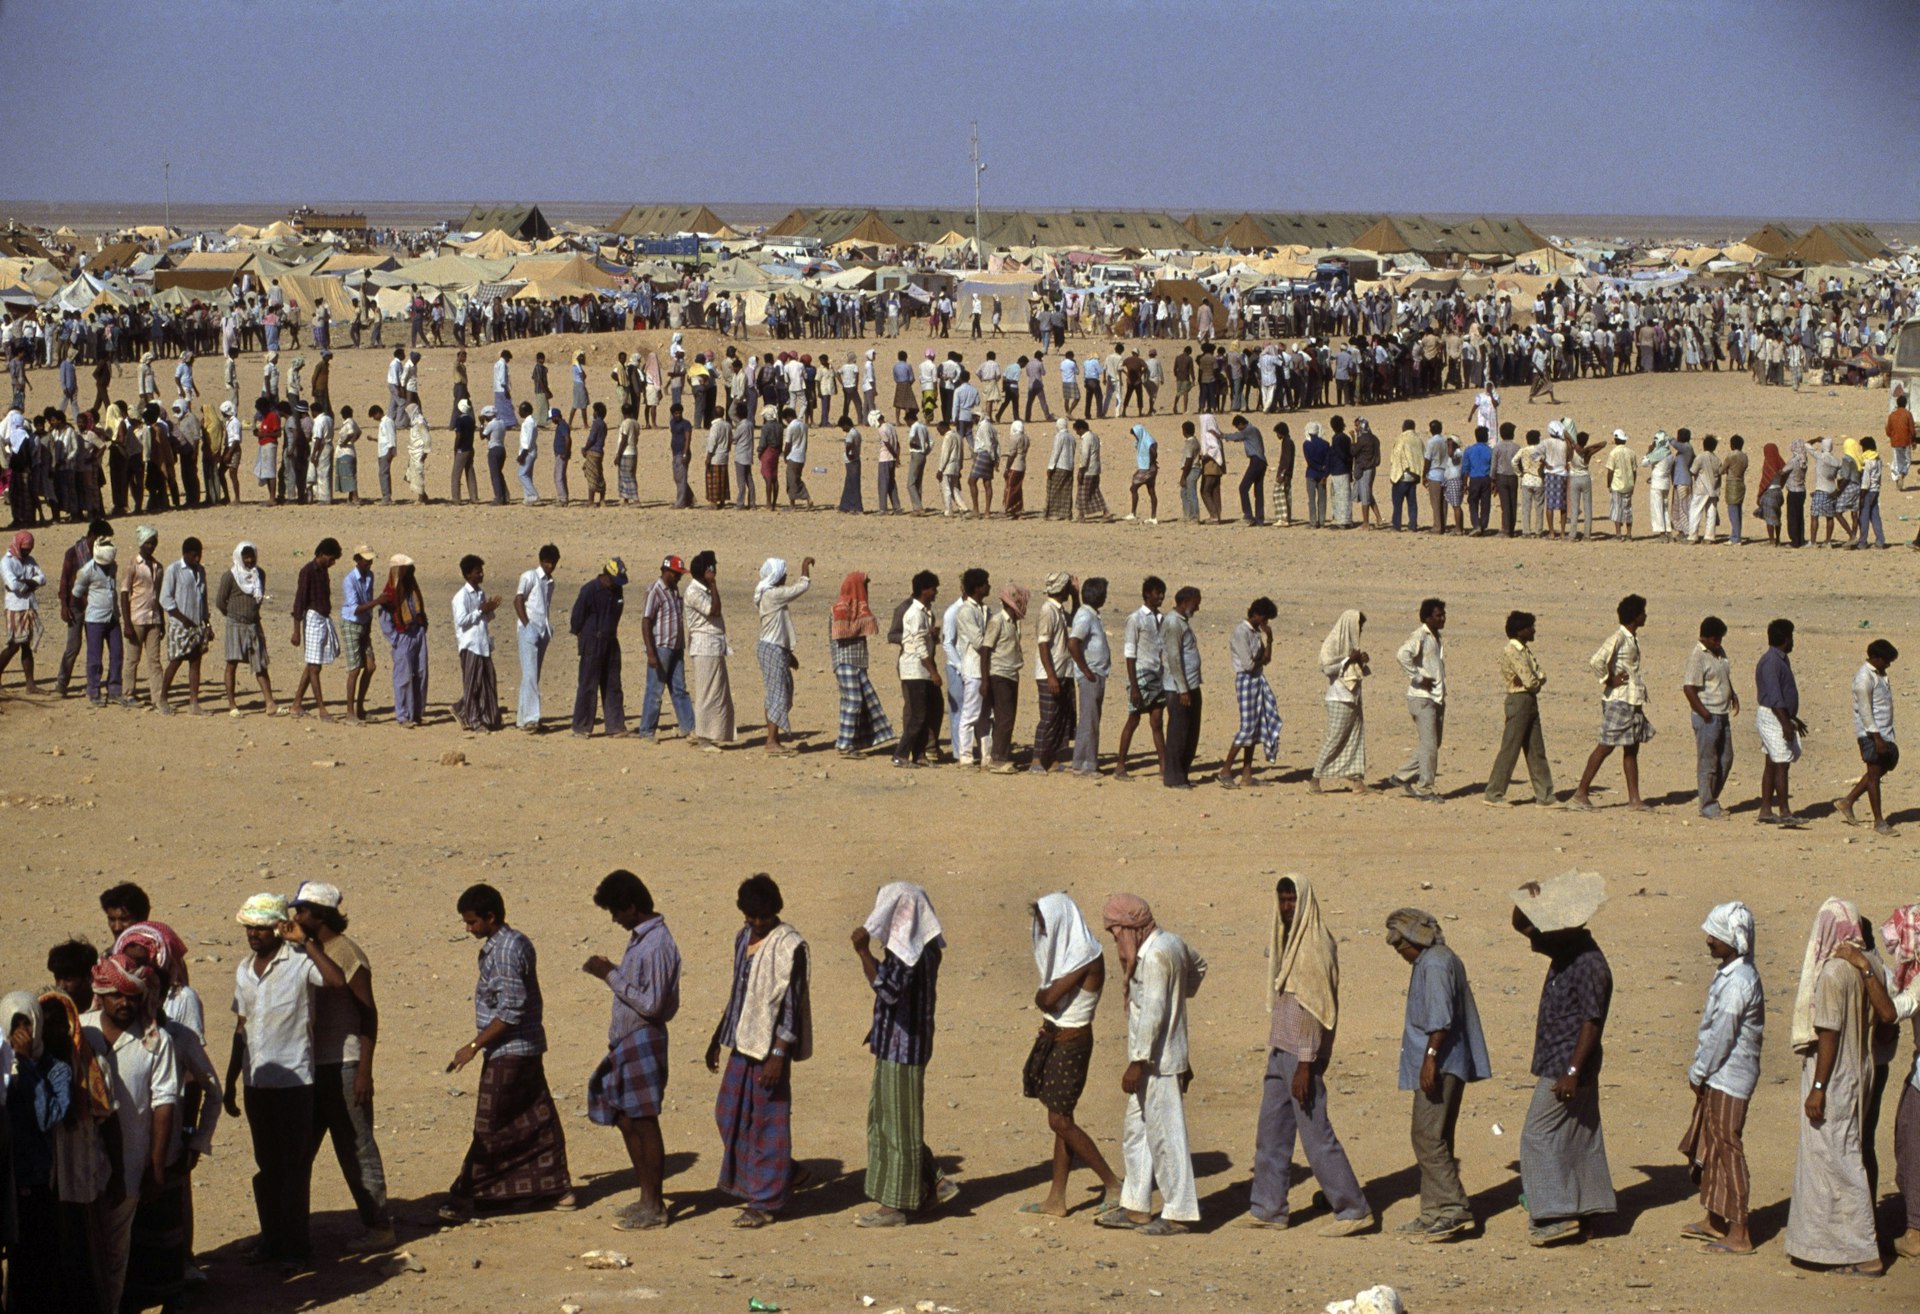 Refugees In the desert. The Sha-alaan One camp, is the worst camp. They have orderly food lines with thousands of refugees waiting calmly for food distribution from the CHARITAS charity organization. Jordan,1990 © Chris Steele-Perkins